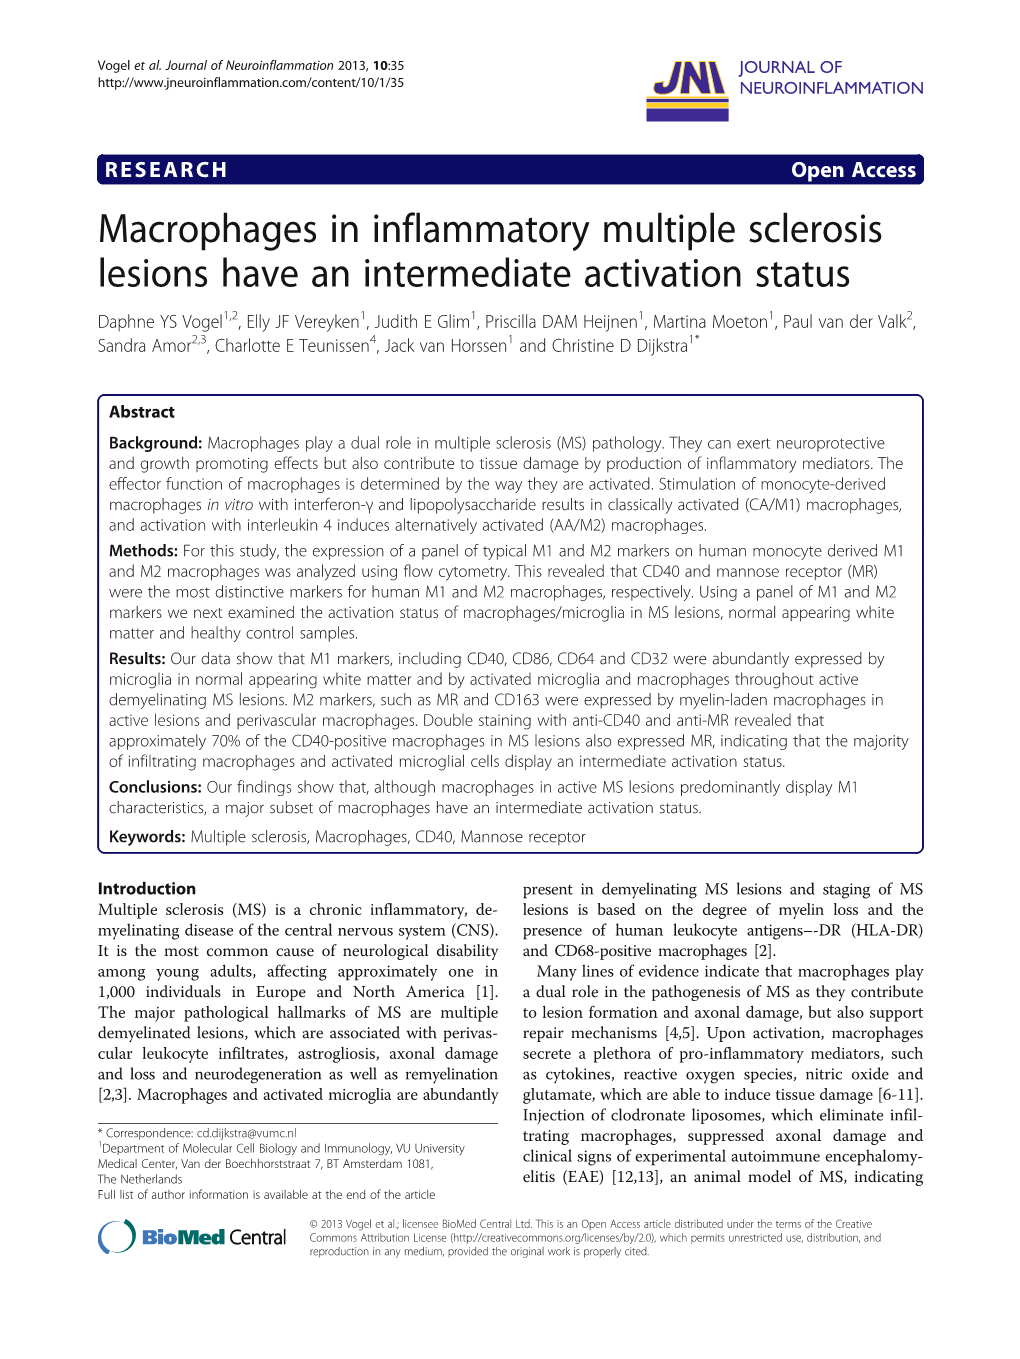 Macrophages in Inflammatory Multiple Sclerosis Lesions Have An